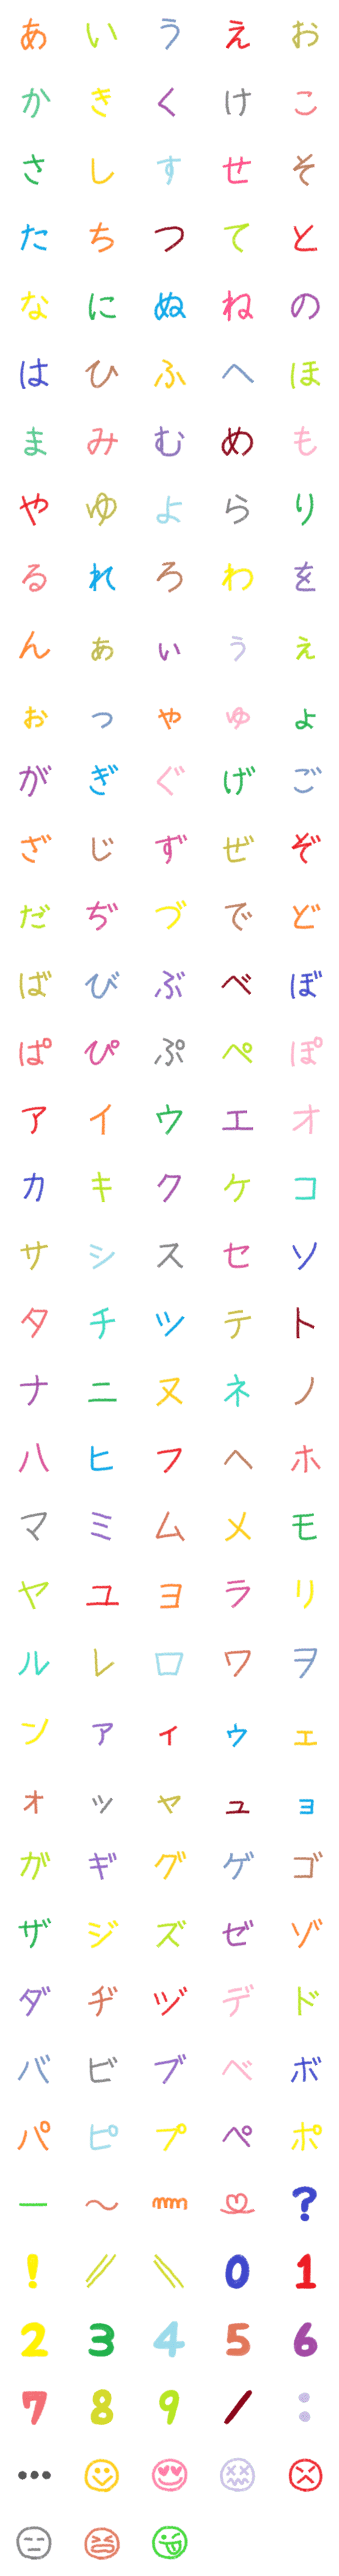 [LINE絵文字]クレヨン文字・絵文字の画像一覧